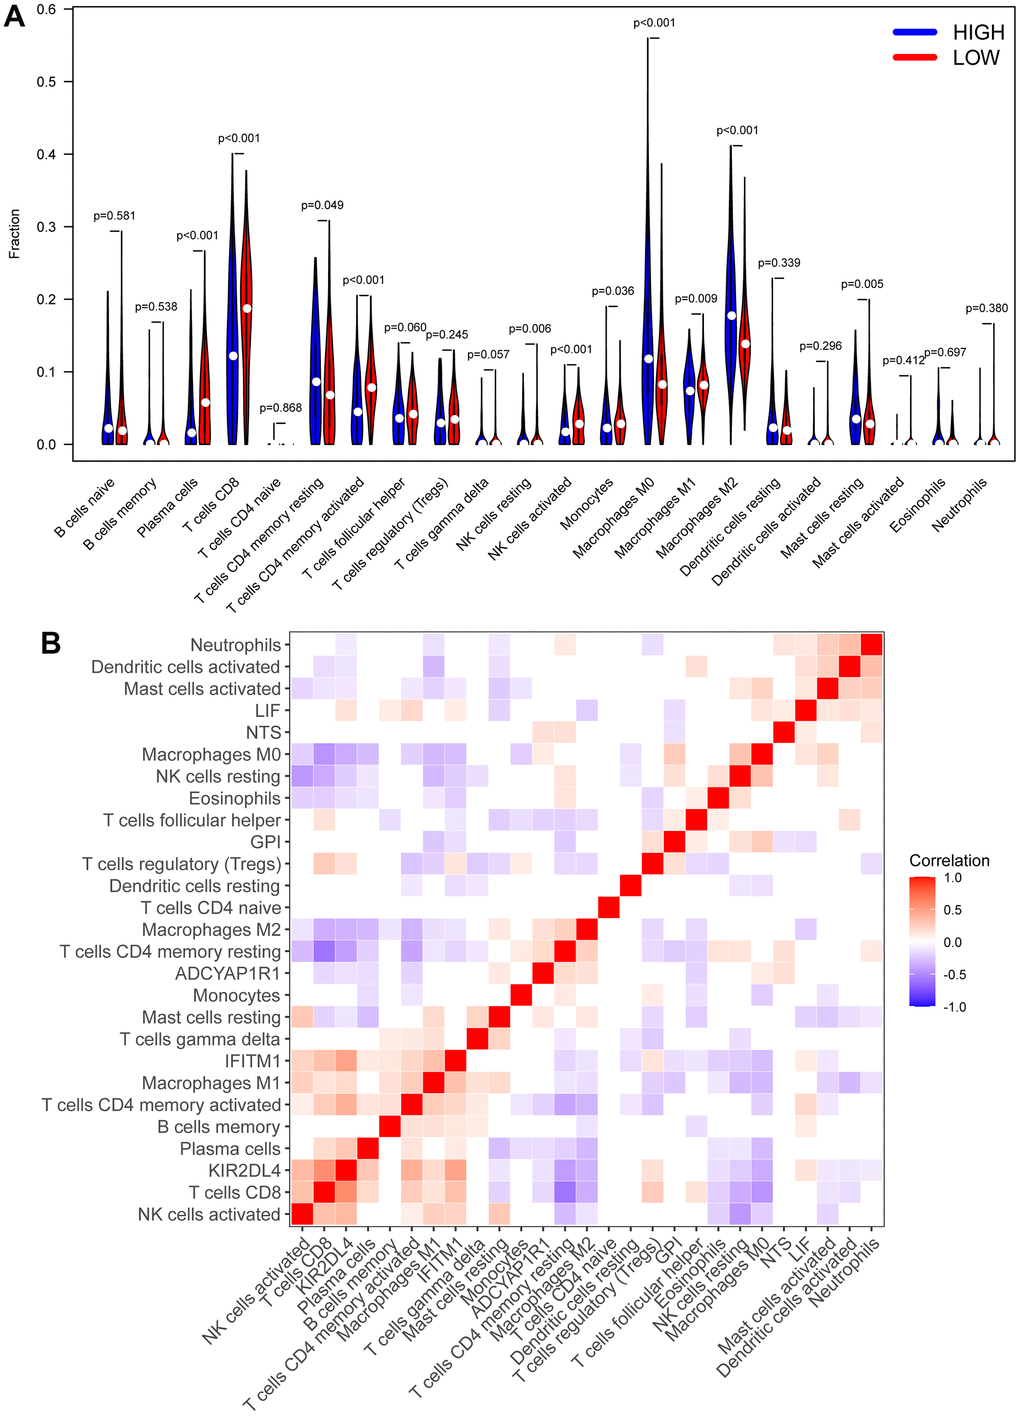 CIBERSORT analysis. (A) The heatmap of immune cell infiltration in high RS samples and low RS samples. Red represents low RS samples, and blue represents high-risk samples. (B) Correlation analysis between different immune cells and biomarkers.